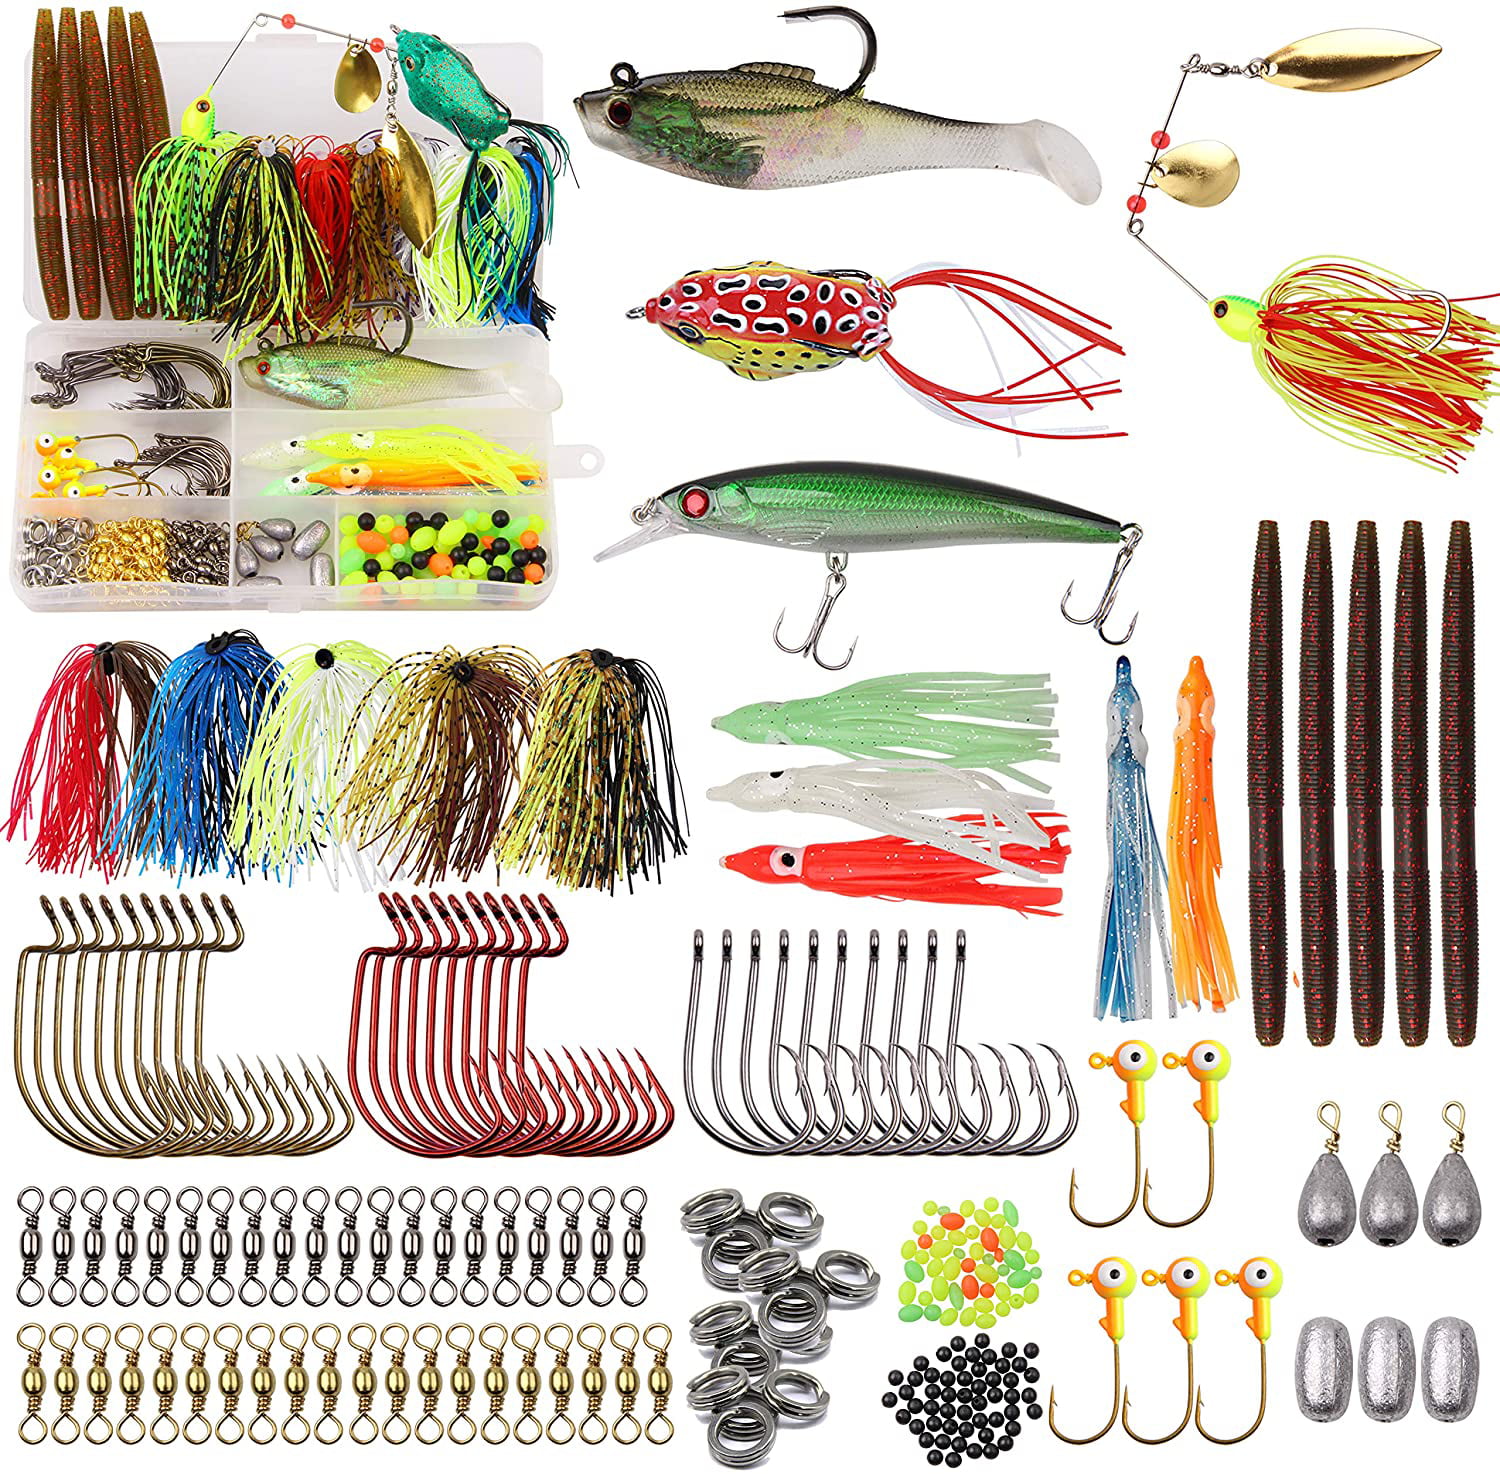 160pcs Fishing Lures Spinner Making Kit with Tackle Box, Inline Spinner  Baits Lure Making Supplies Spinner Blades Lure Bodies Accessories Kit for  Bass